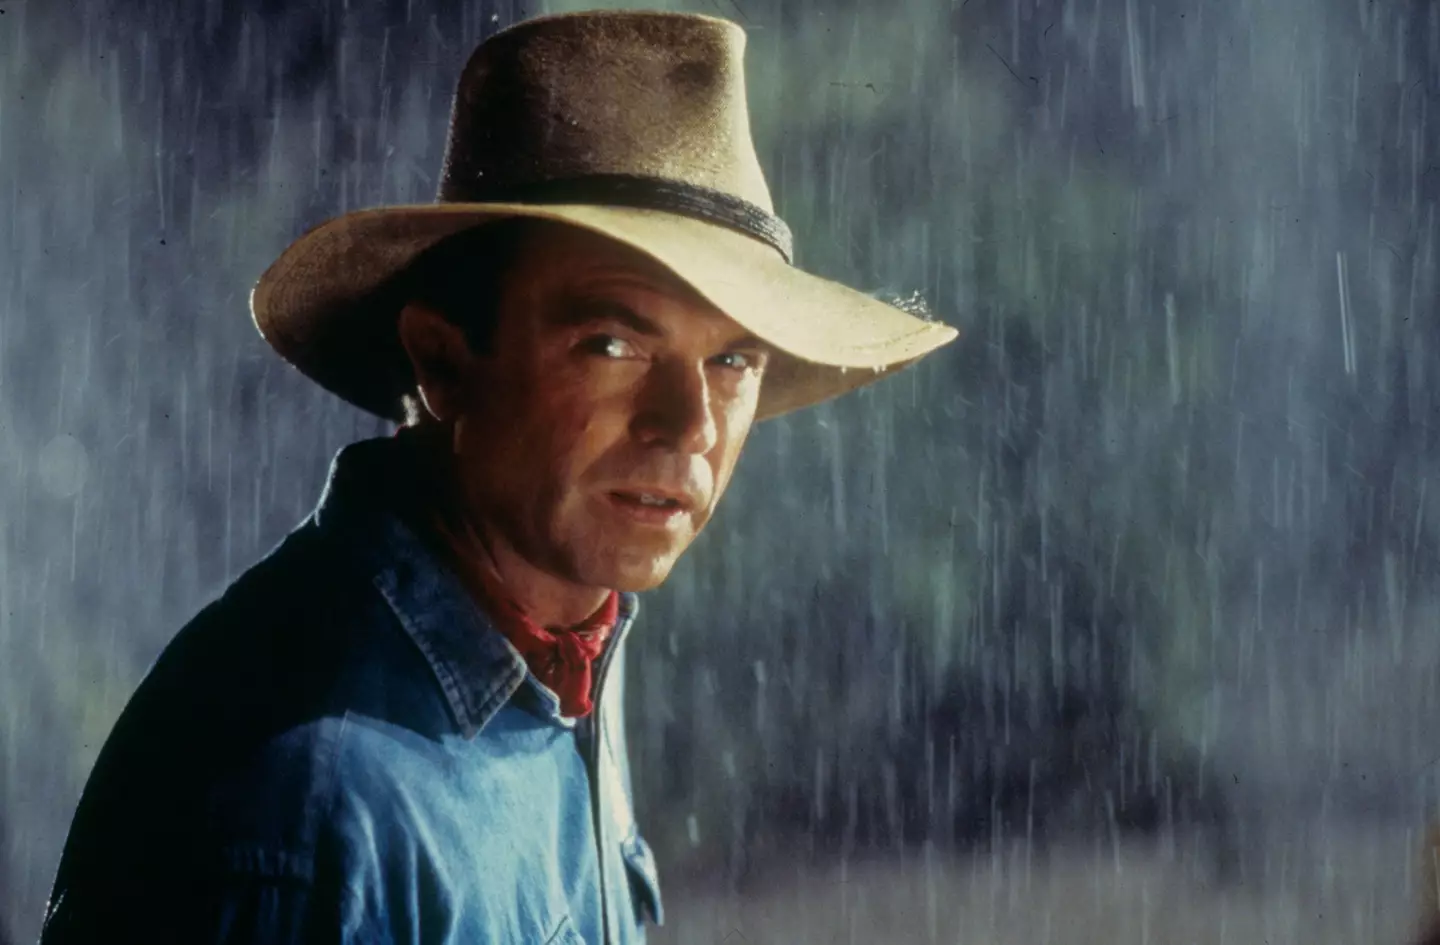 Sam Neill is most famous for playing Alan Grant.